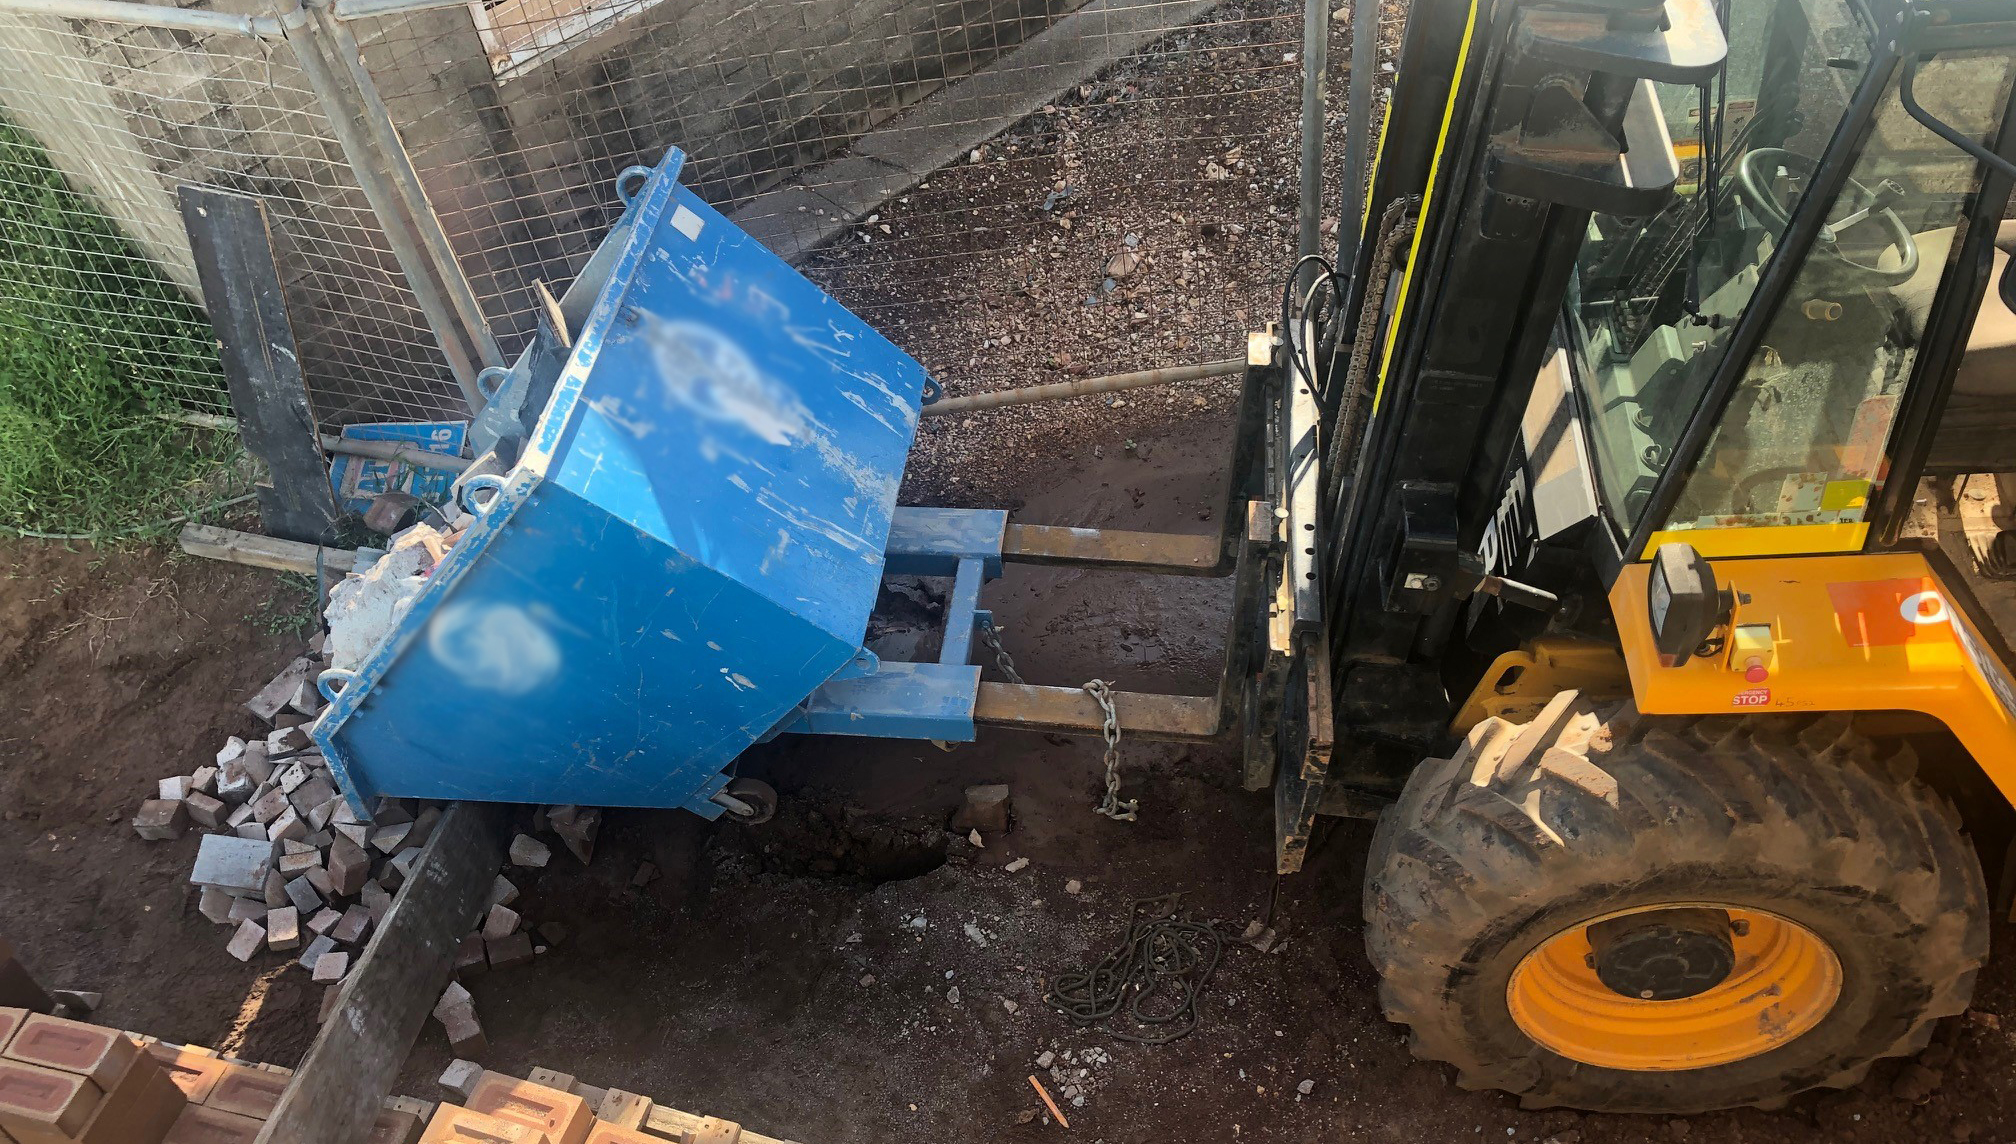 The image of the forklift shows the tines were not fully inserted into the bin pockets.